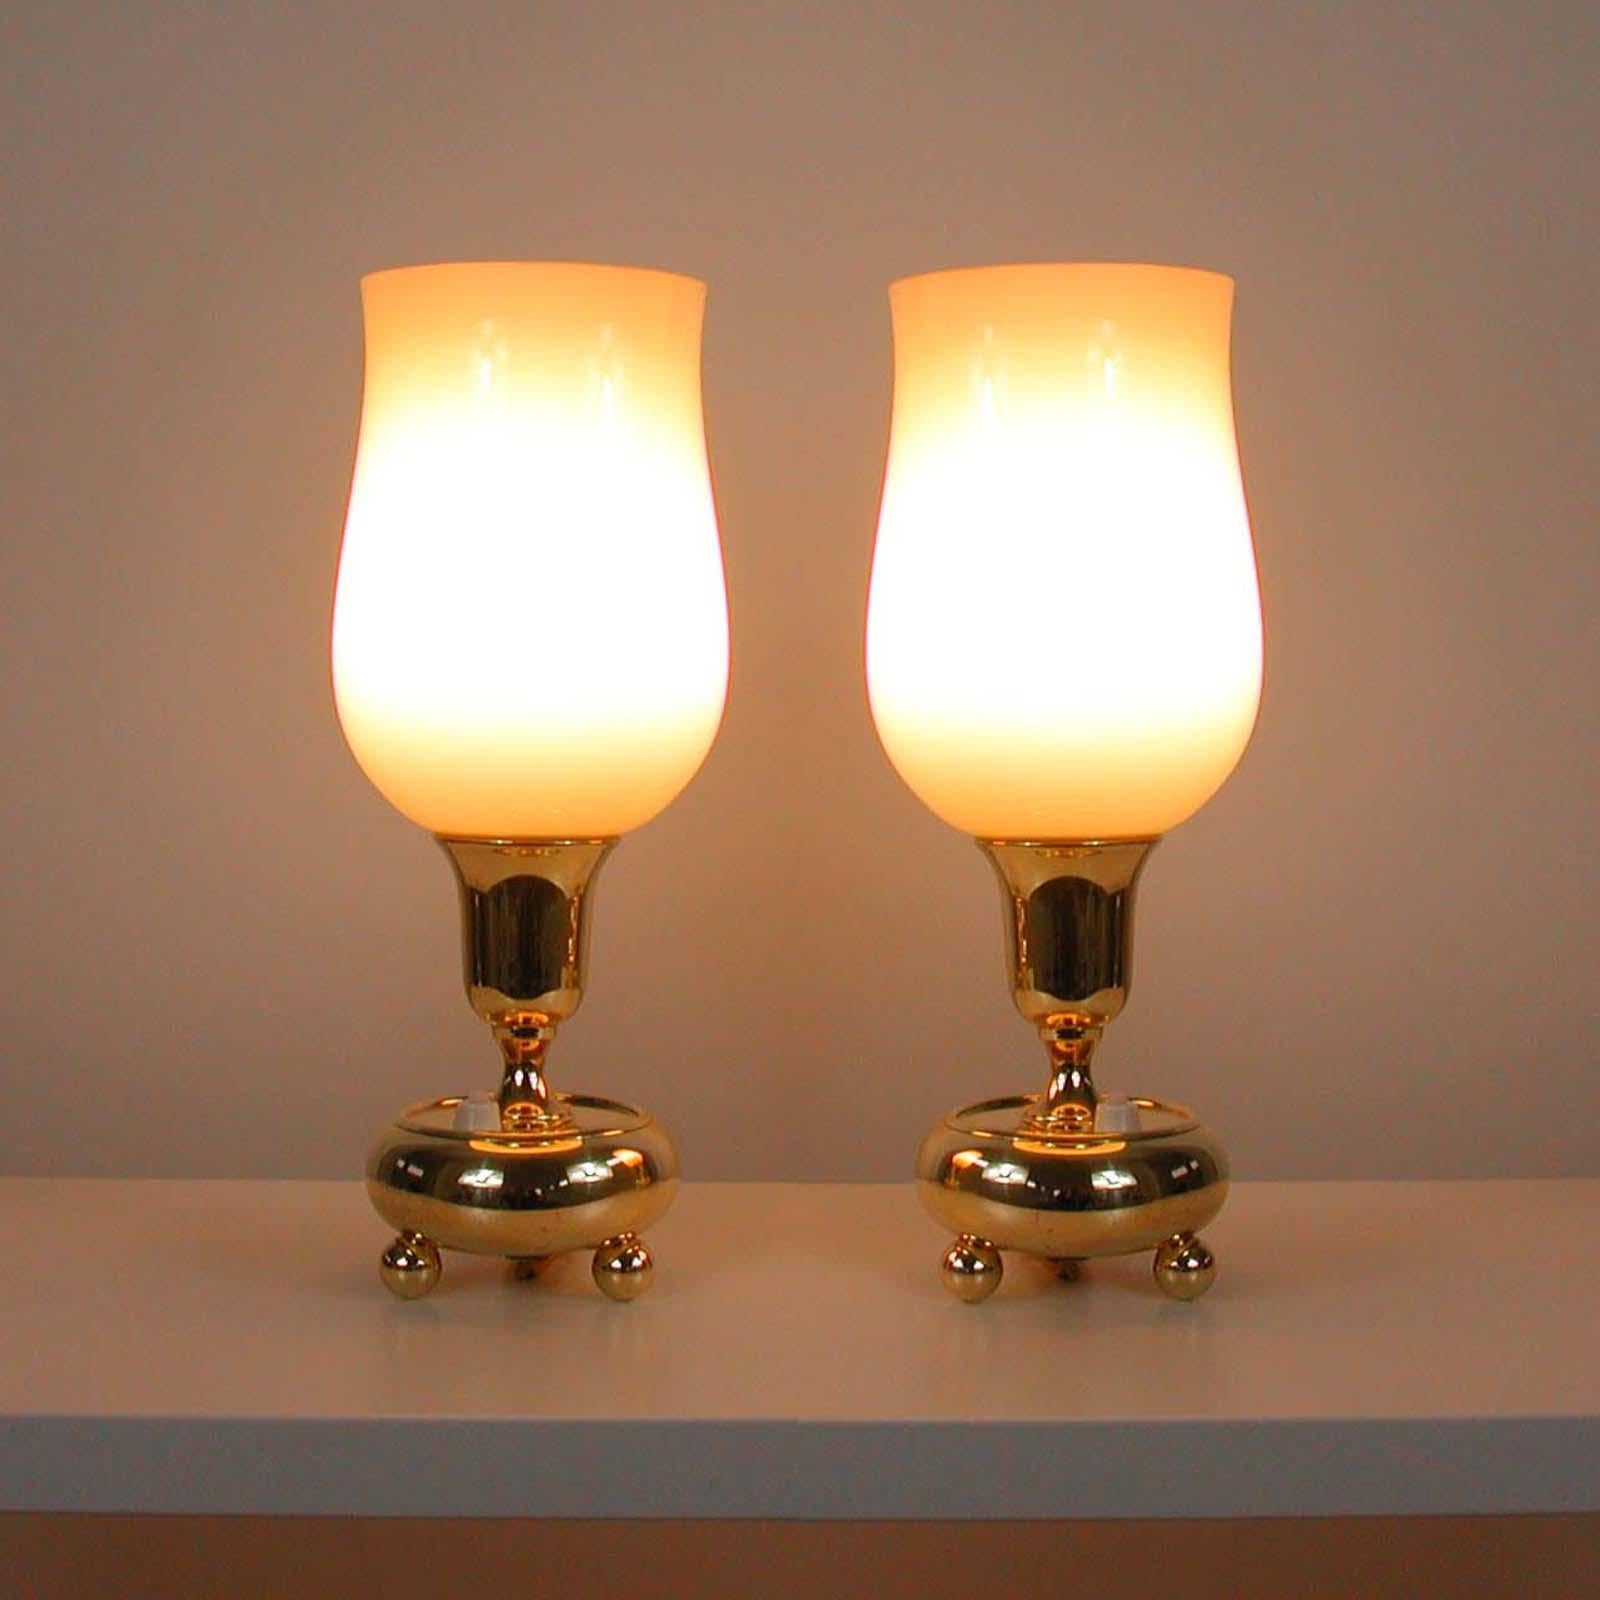 German Bauhaus Brass and Opal Torchiere Table Lamps, Set of 2, 1930s For Sale 2